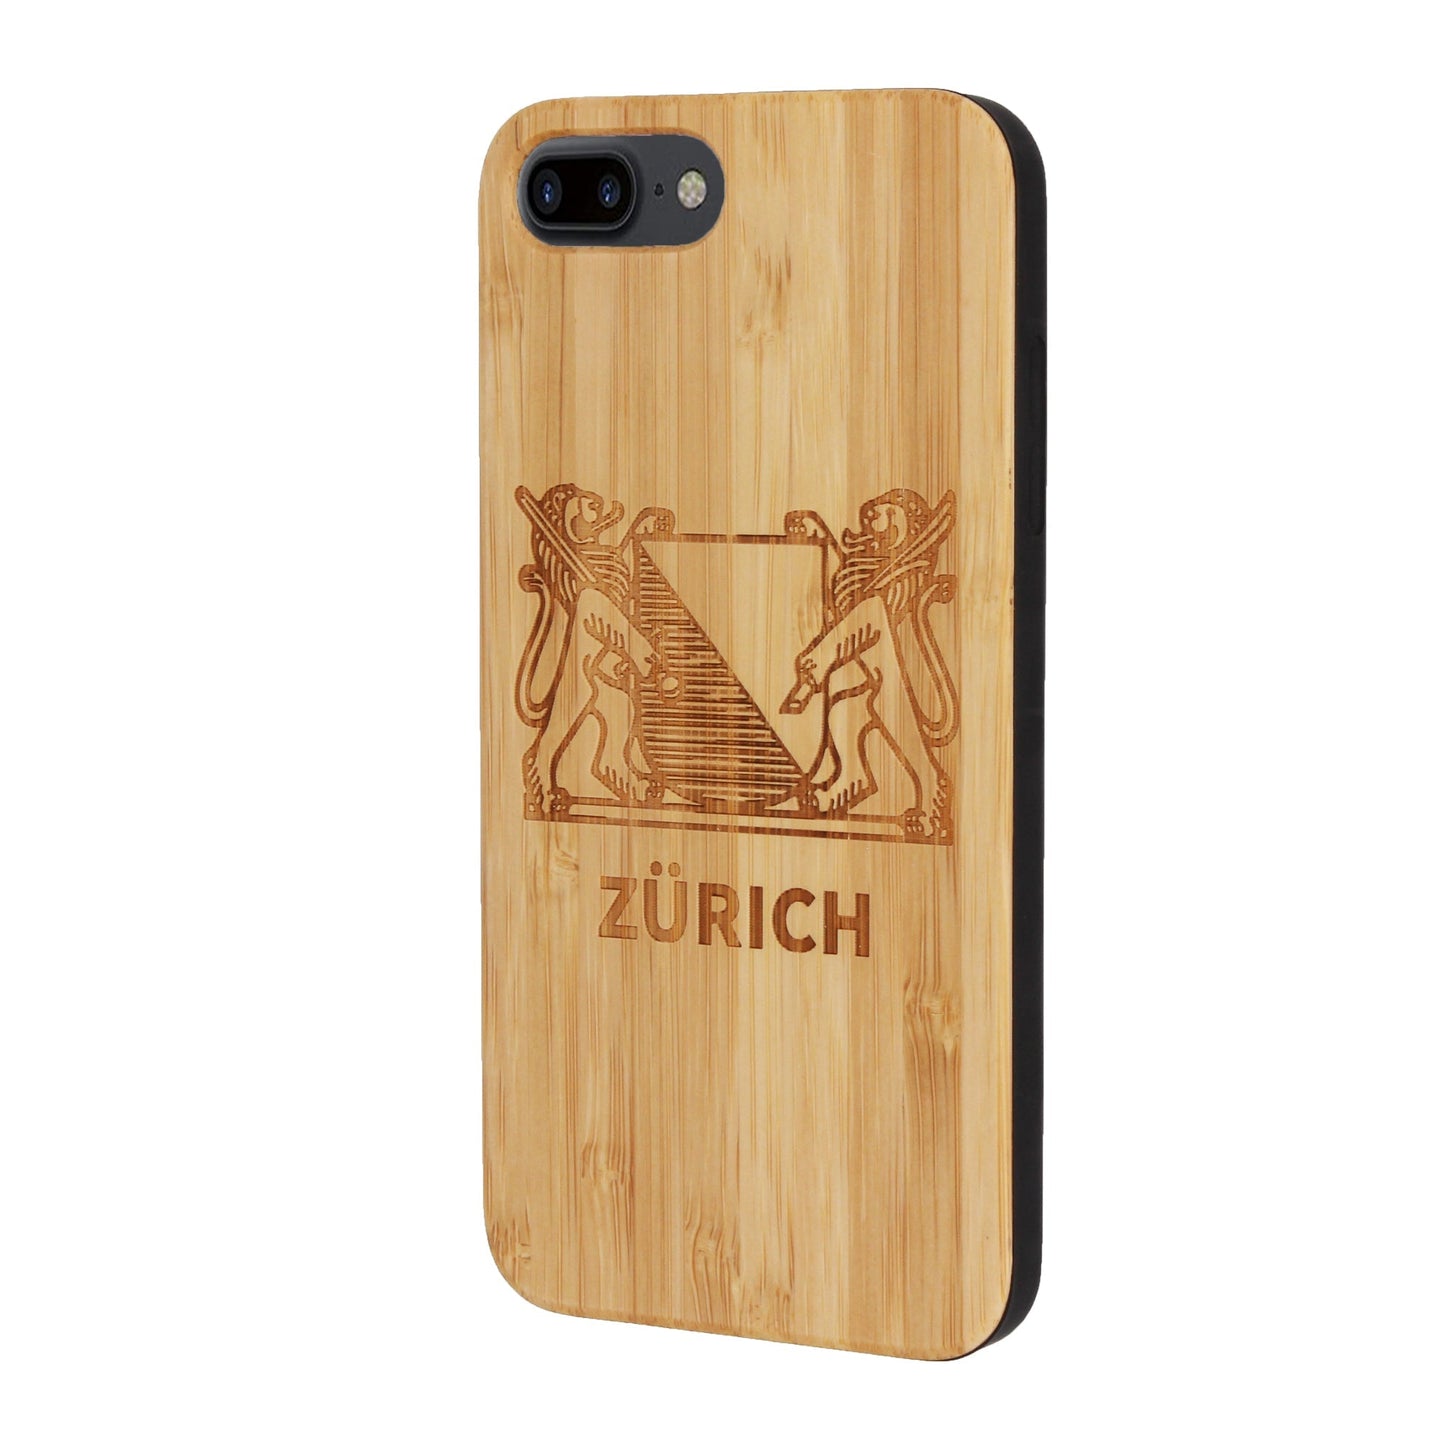 Zurich Coat of Arms Eden Bamboo Case for iPhone 6/6S/7/8 Plus 